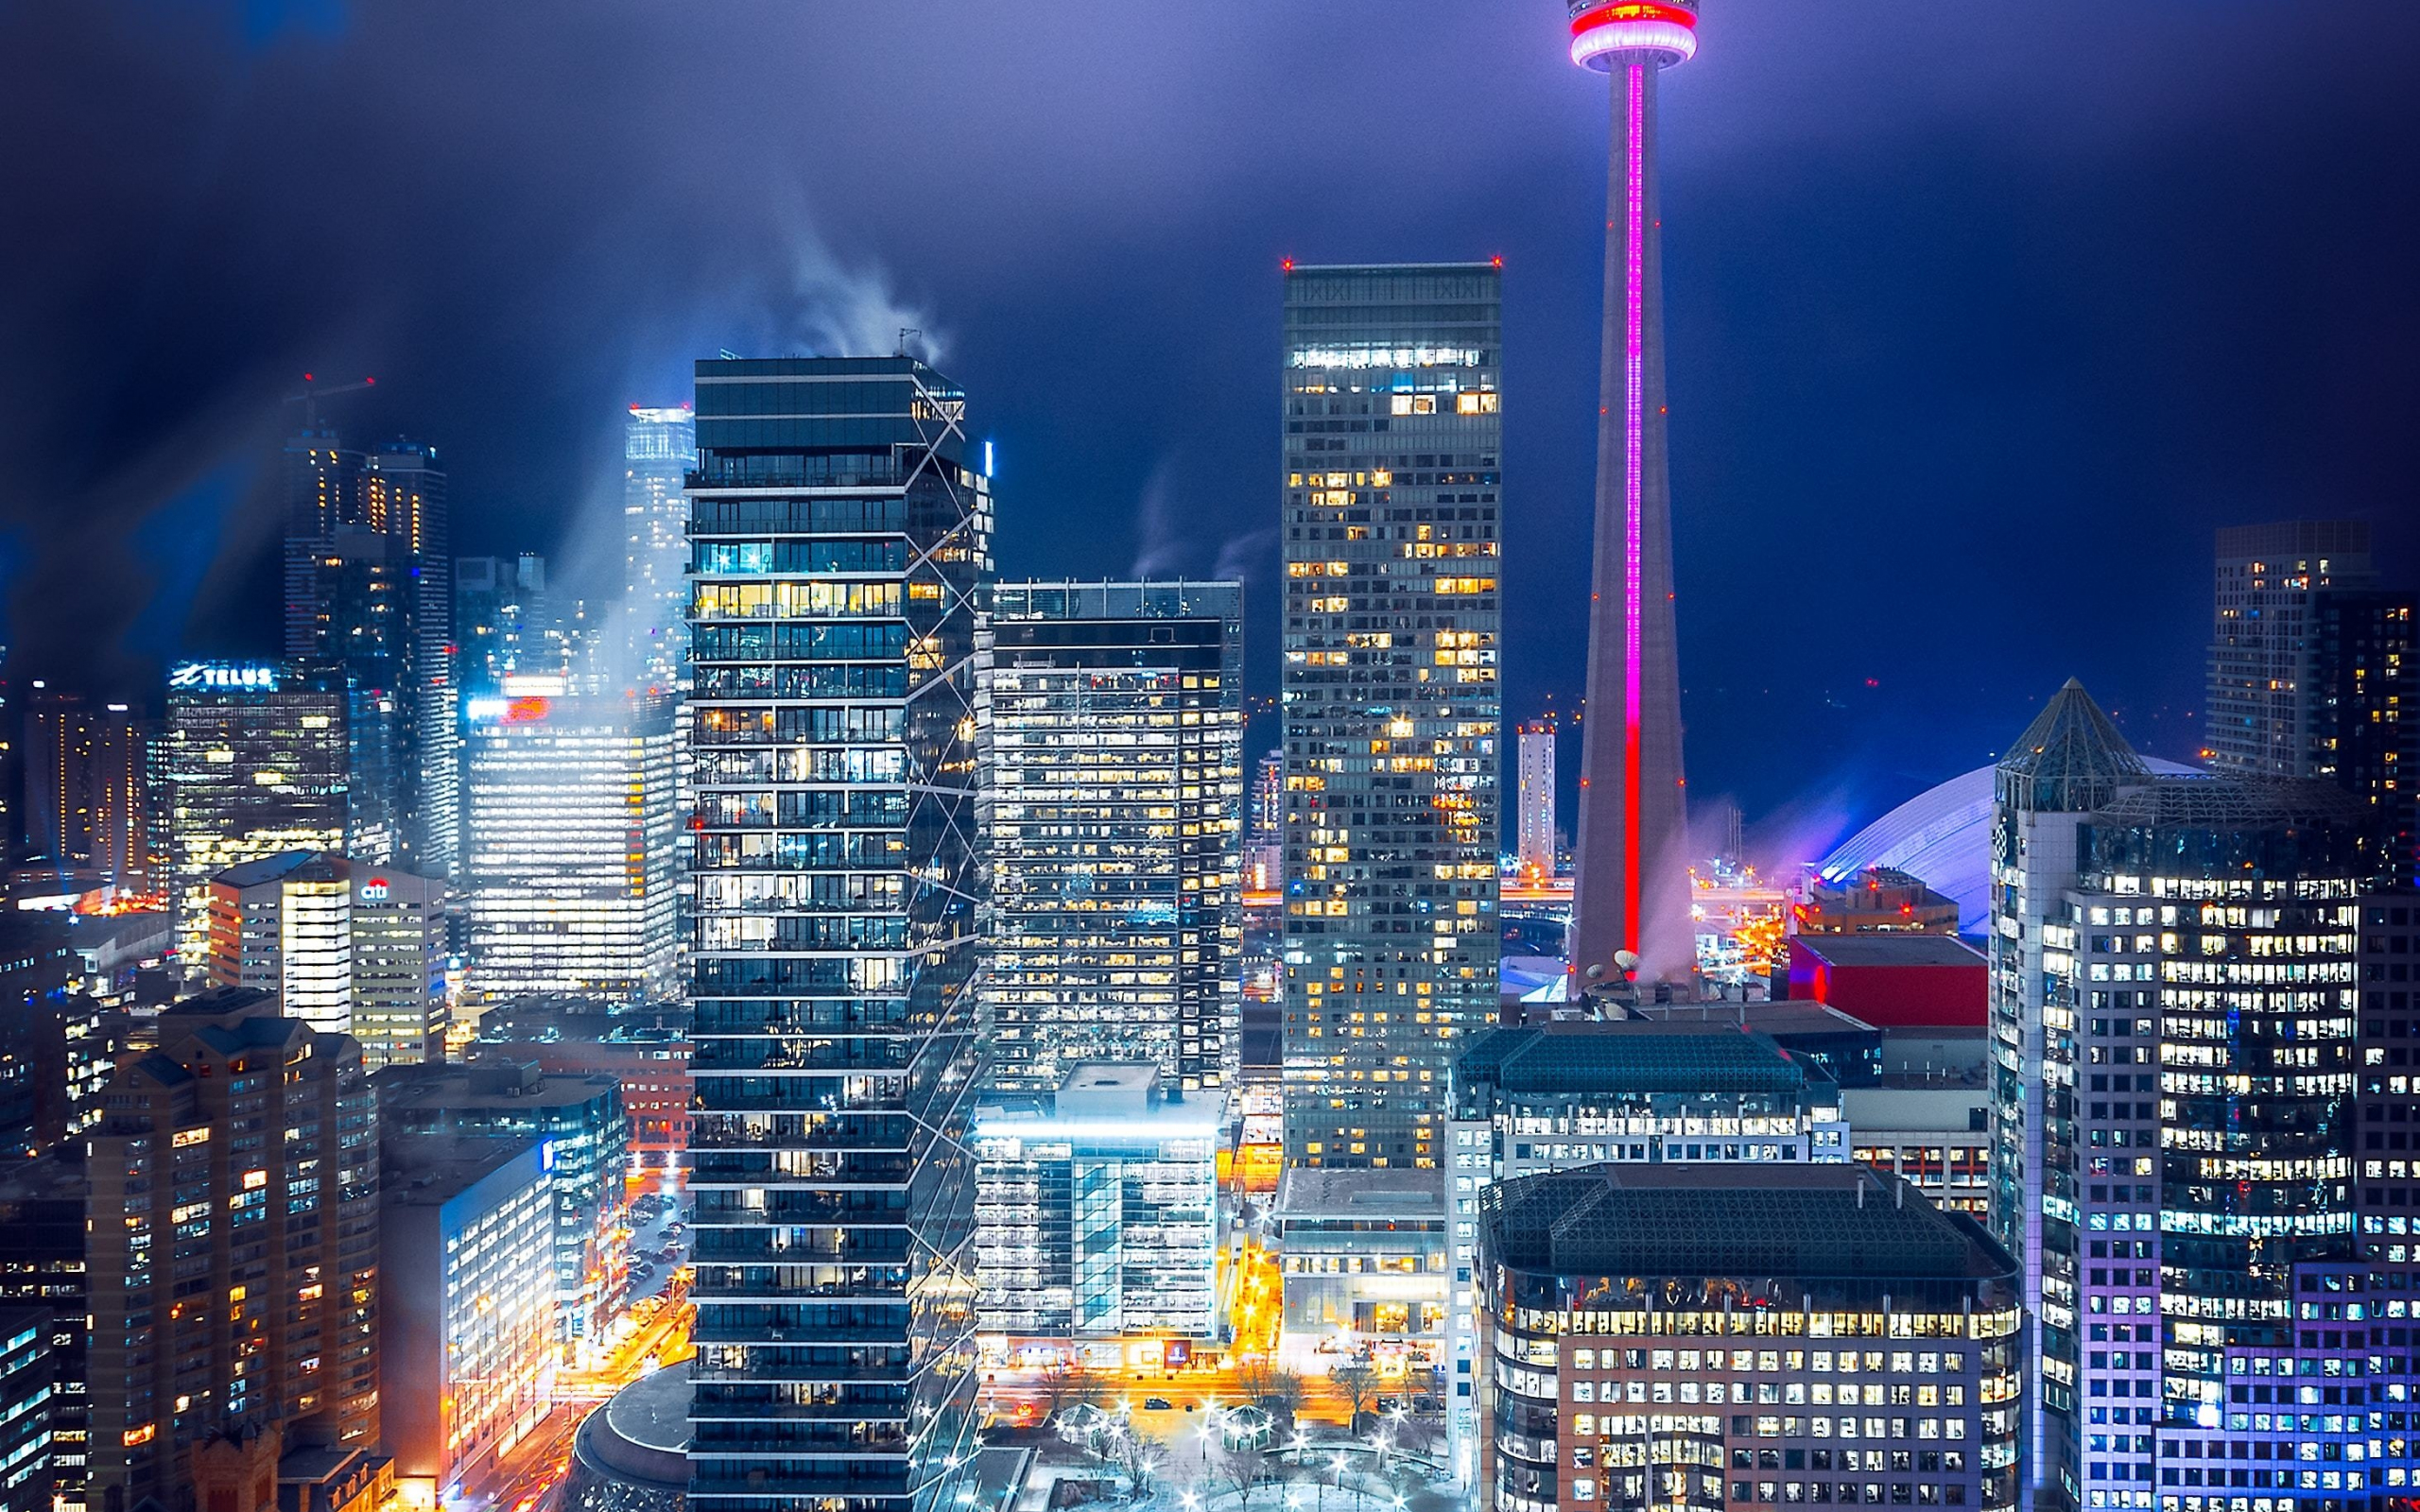 Download wallpaper 2560x1600 toronto, cityscape, high skyscrapers, lights,  dual wide 16:10 2560x1600 hd background, 22566